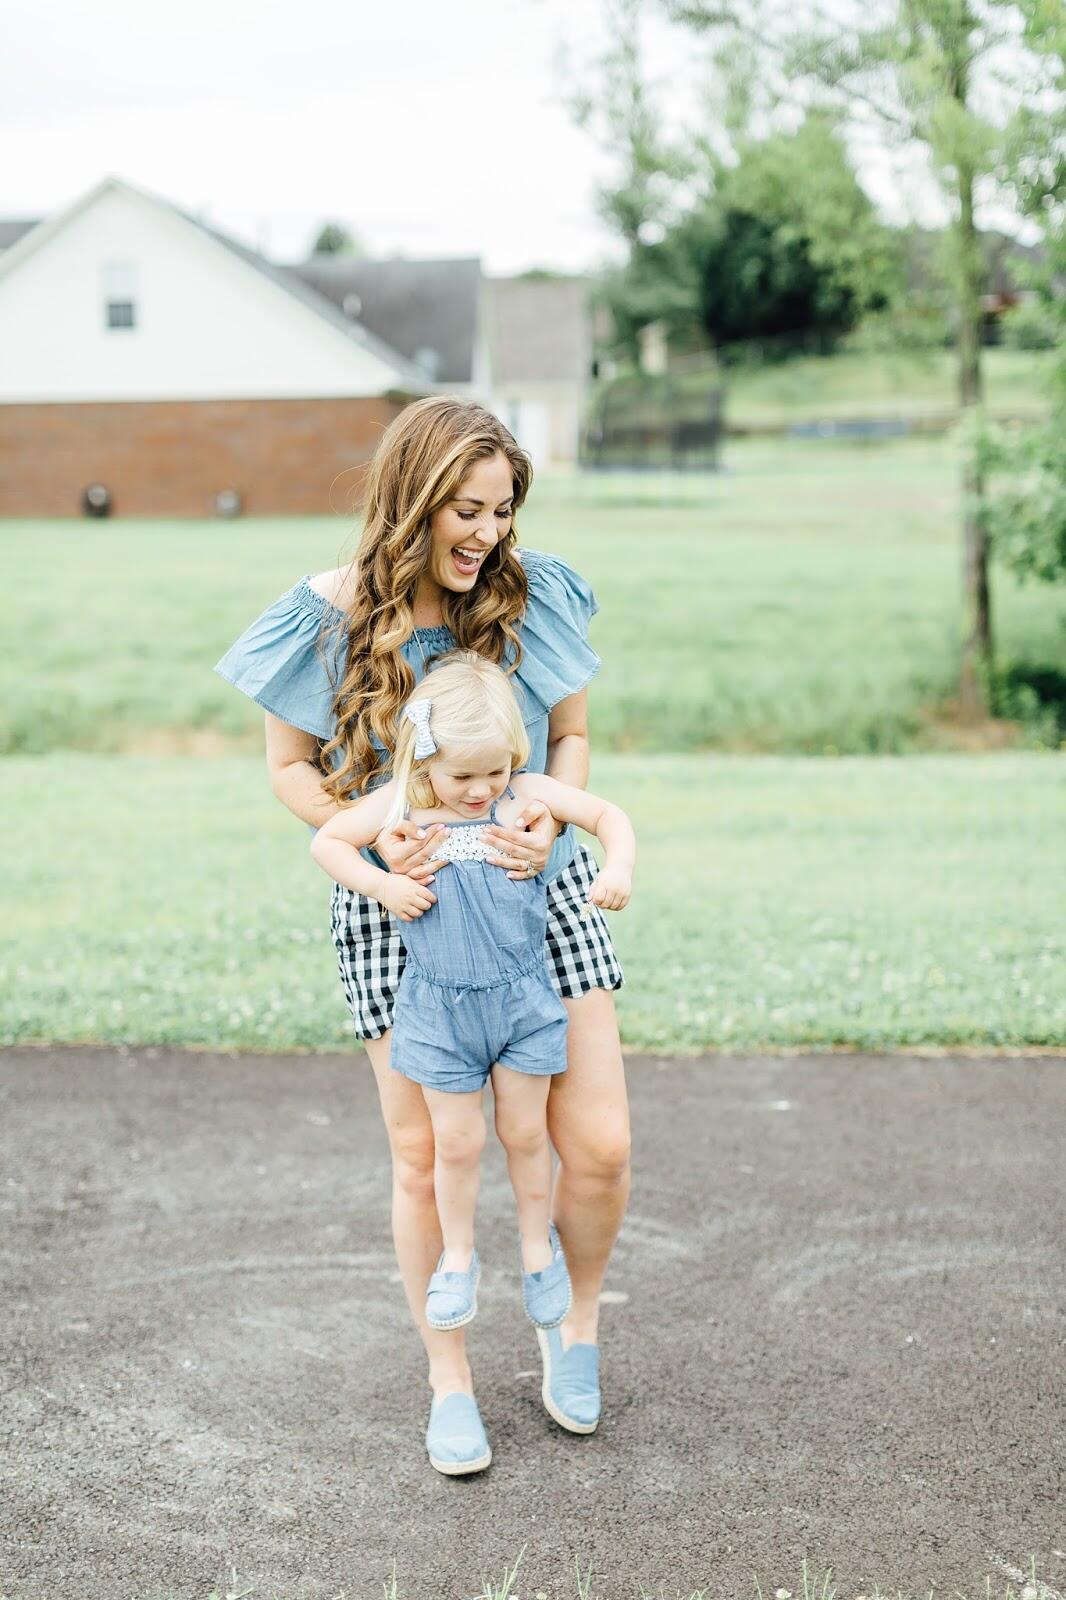 How to Wear Double Chambray with TOMS by fashion blogger Laura of Walking in Memphis in High Heels